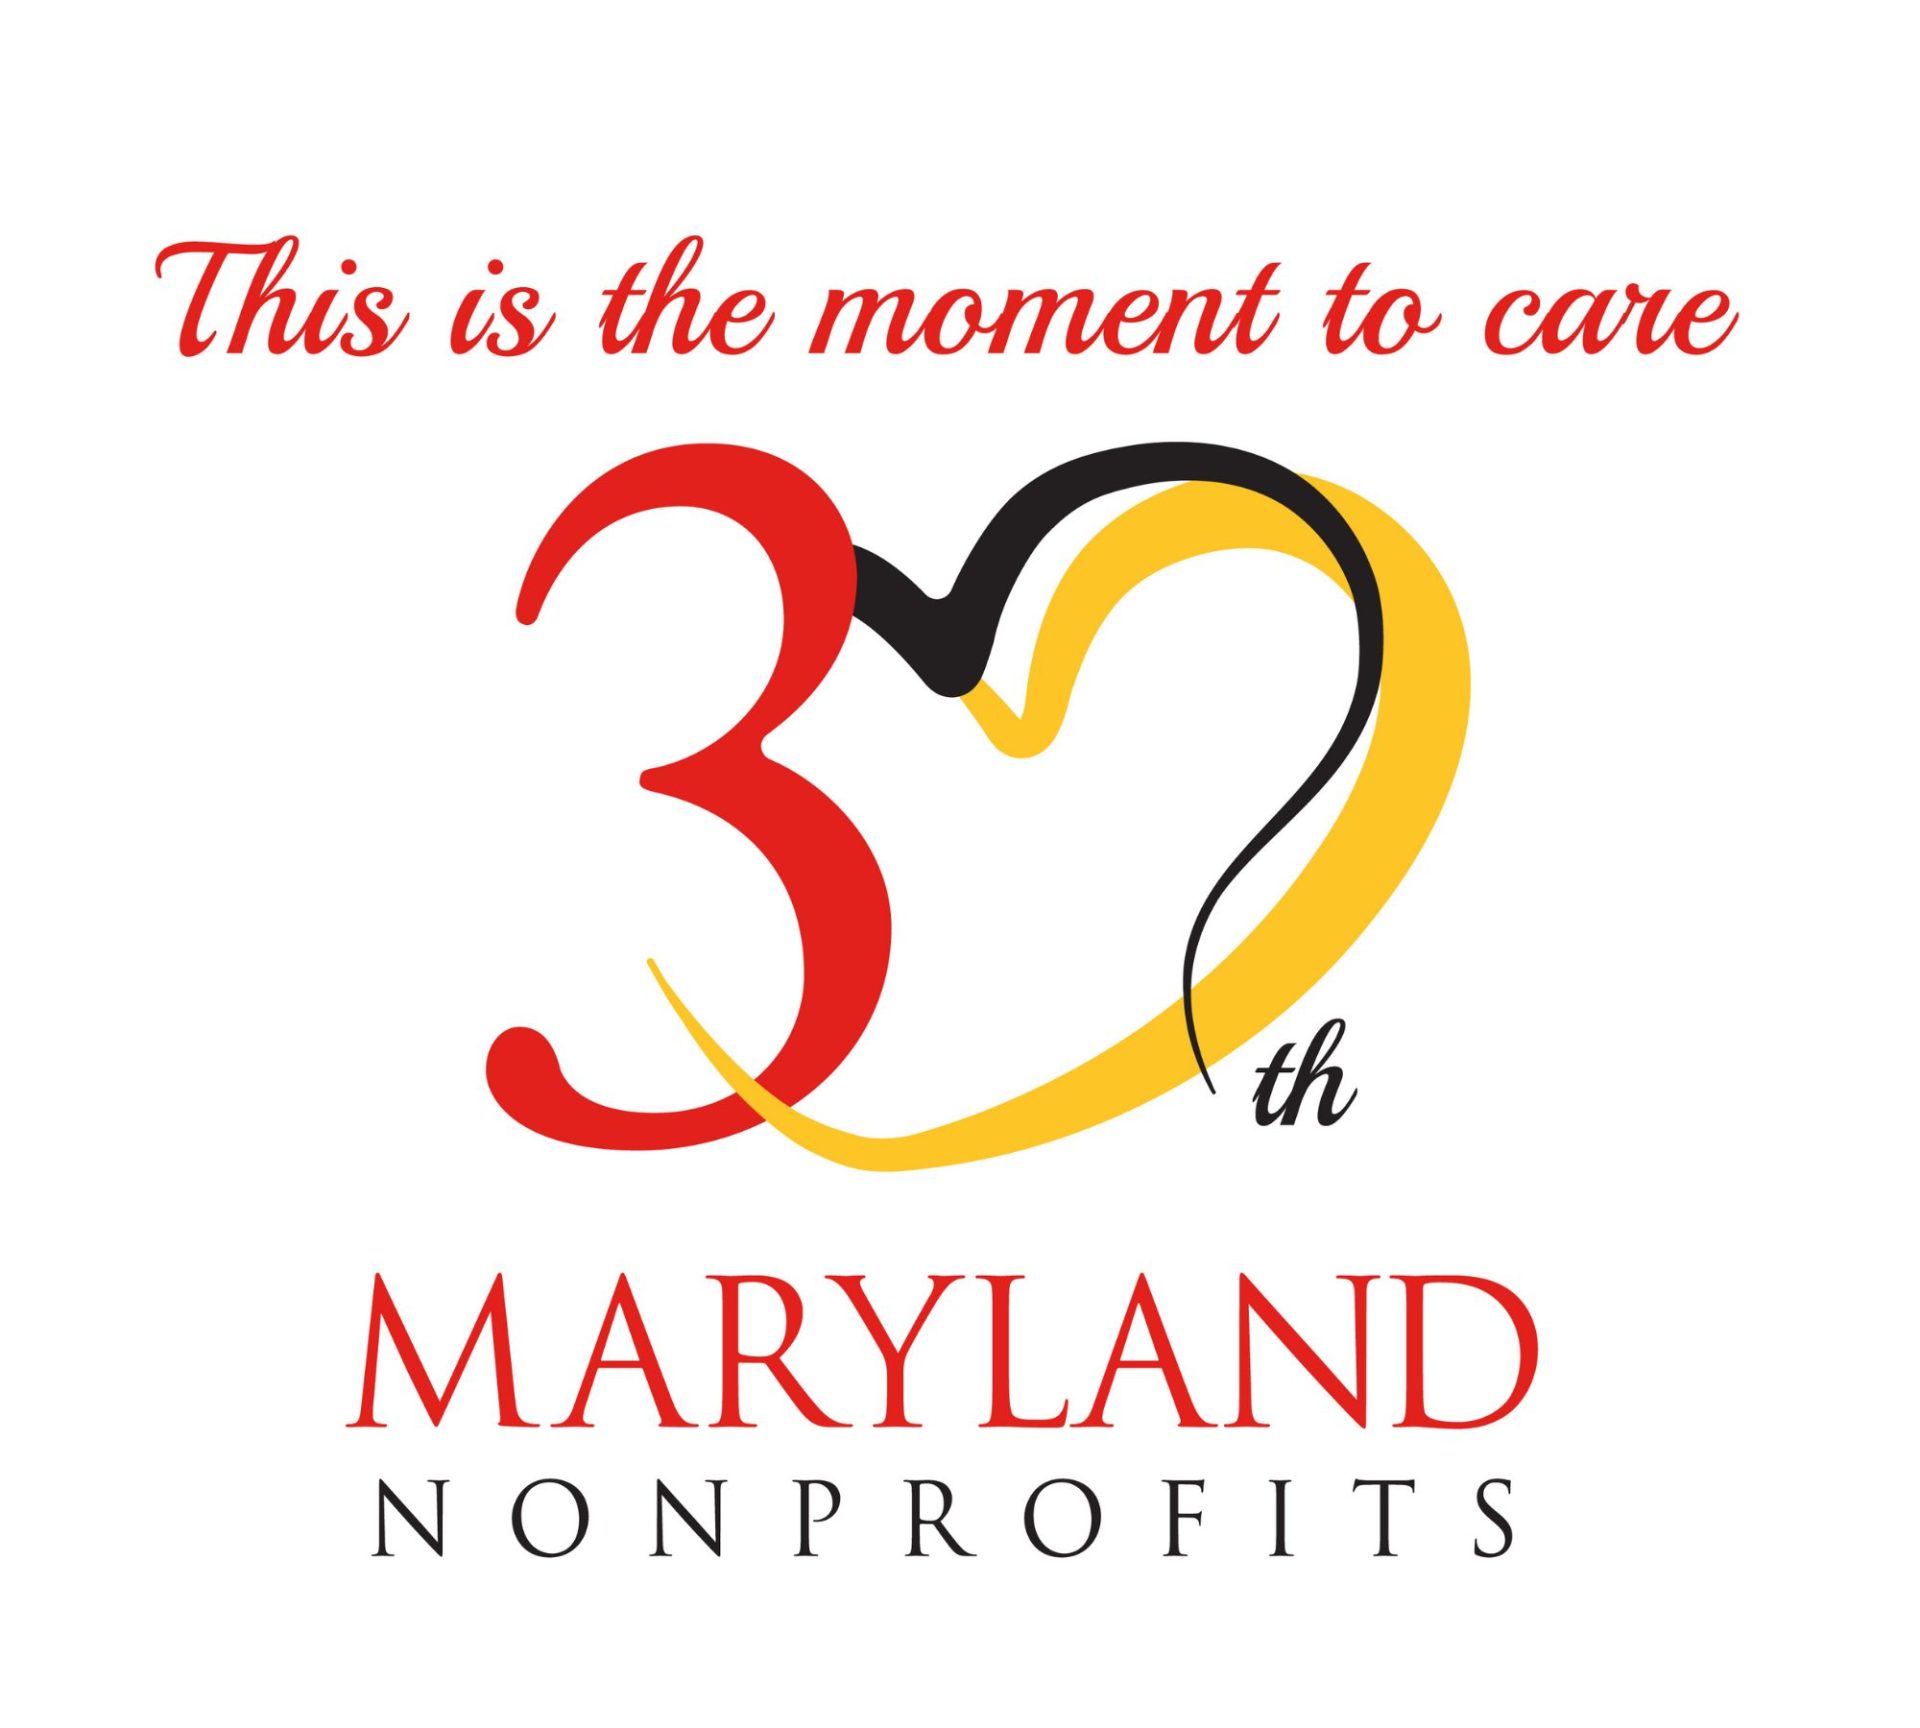 This is the moment to care logo - Maryland Nonprofits